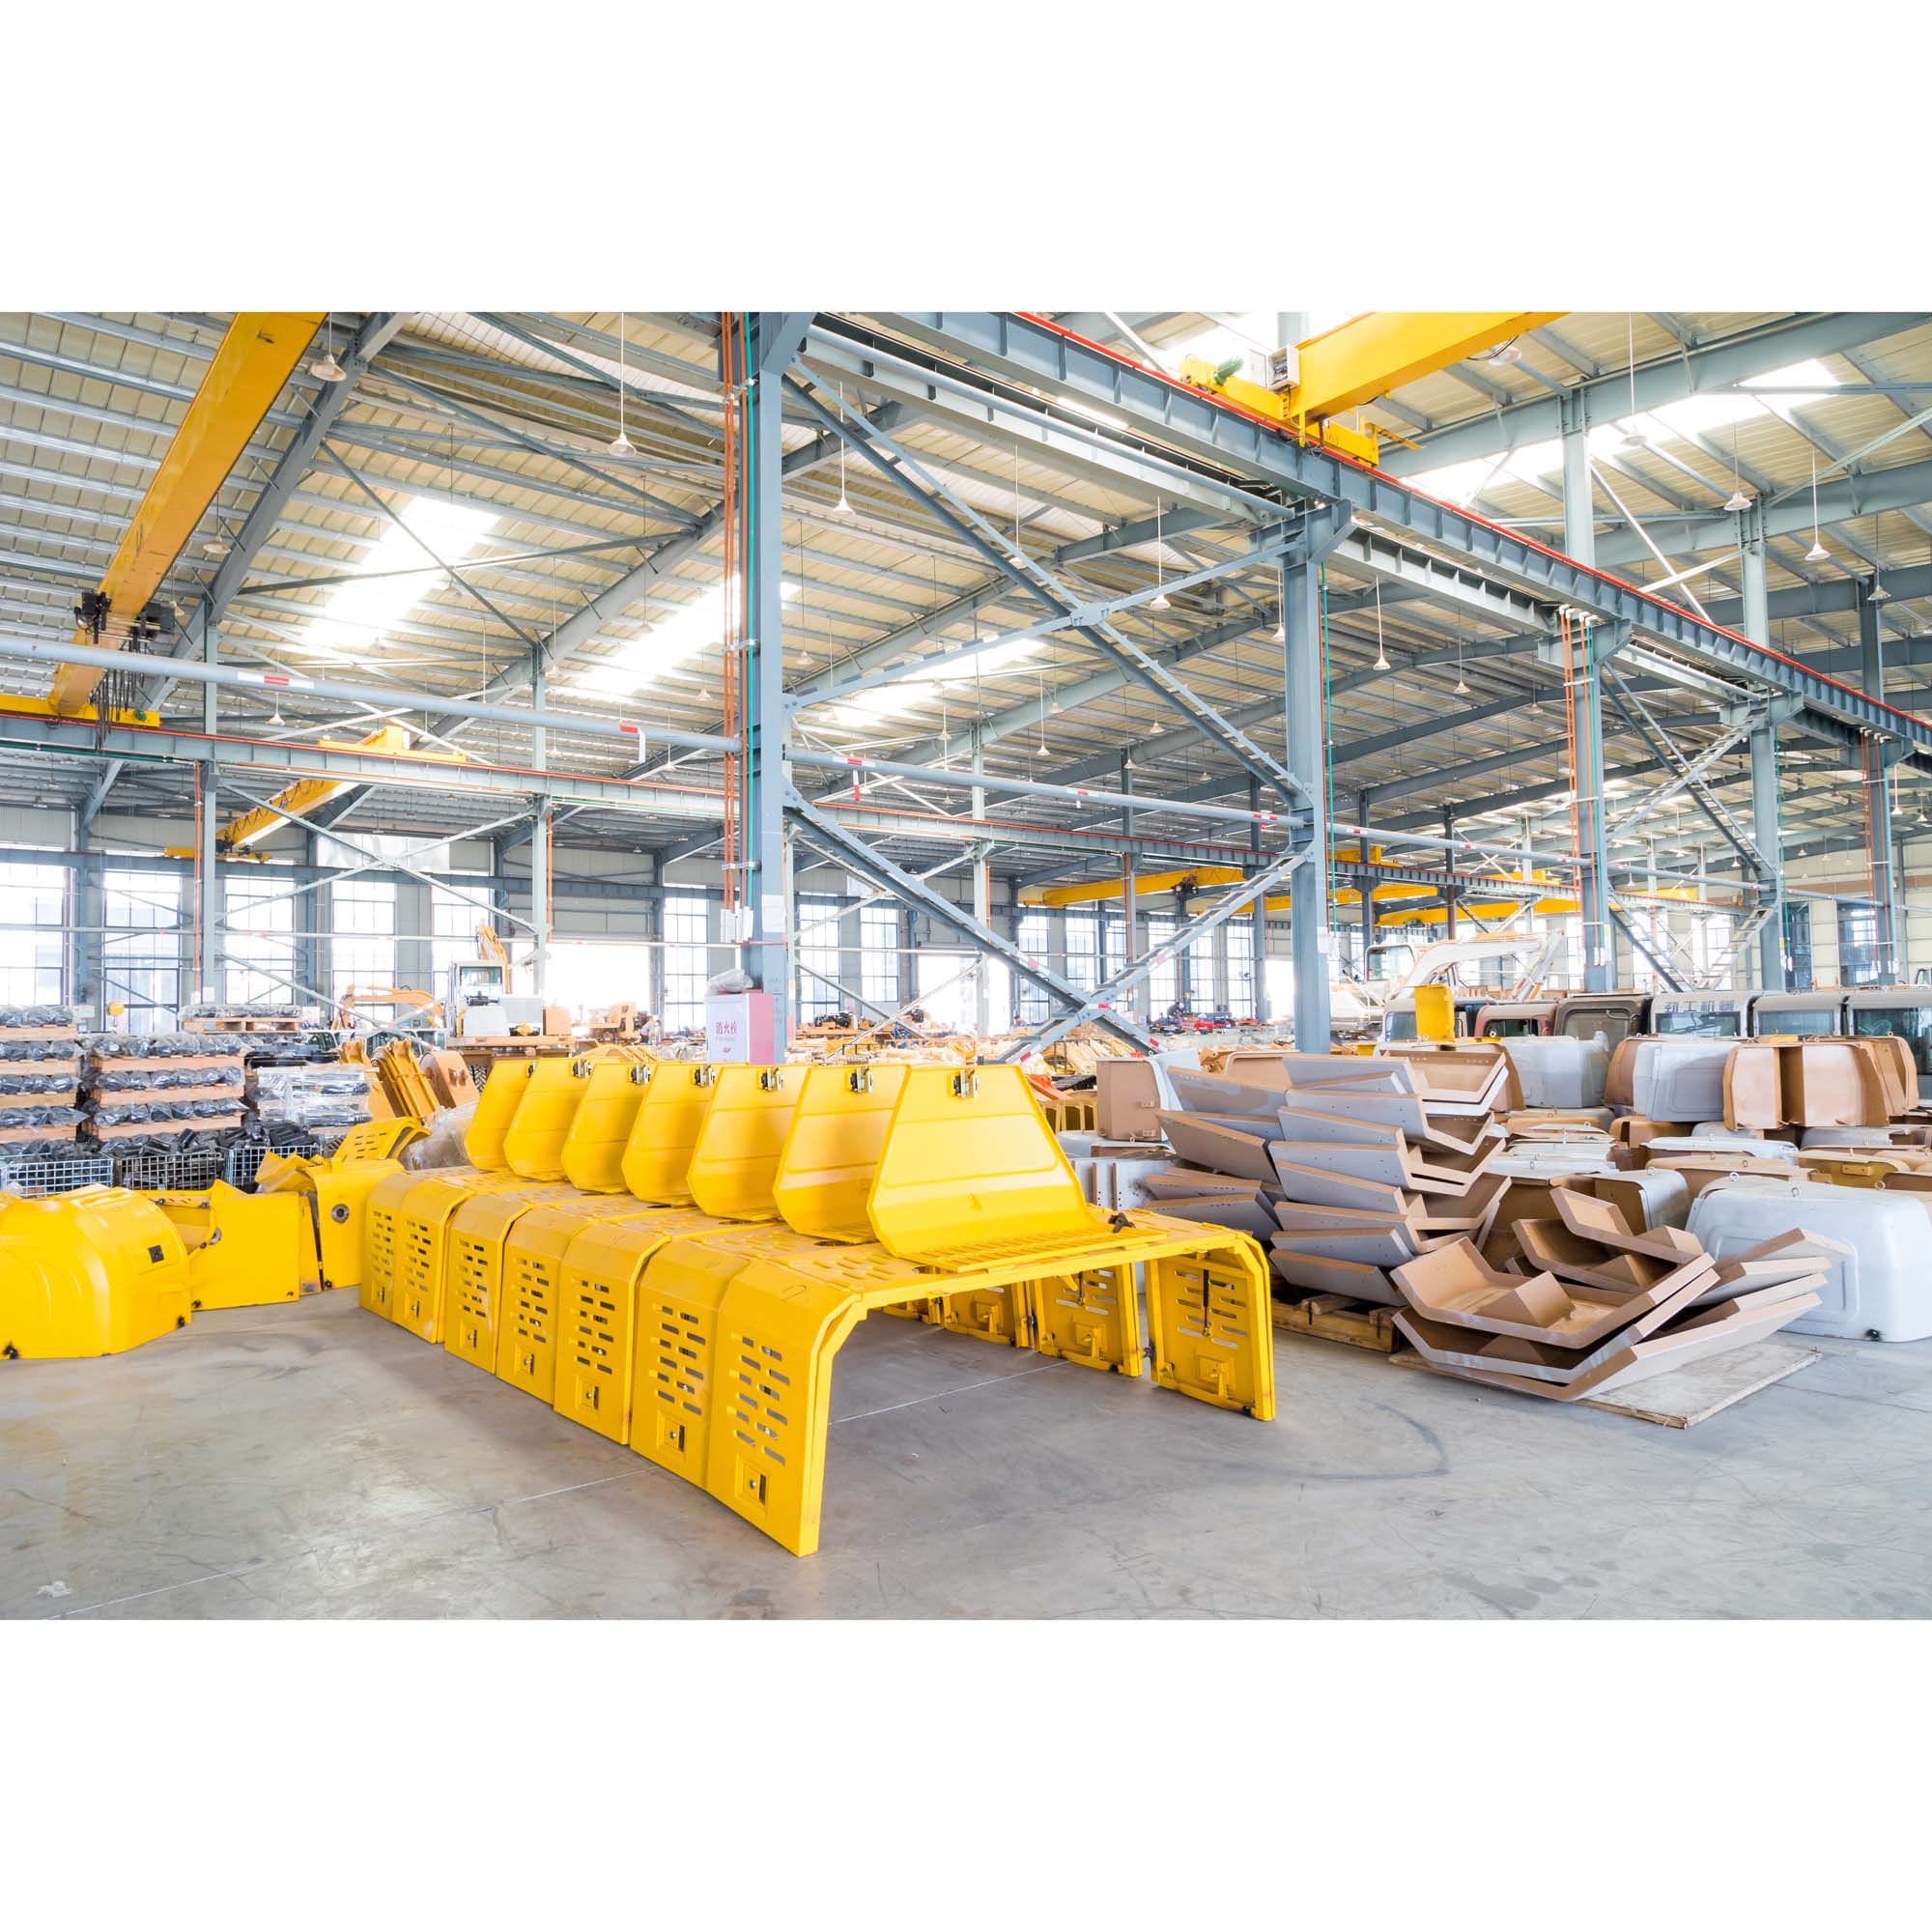 Our Attachments Warehouse